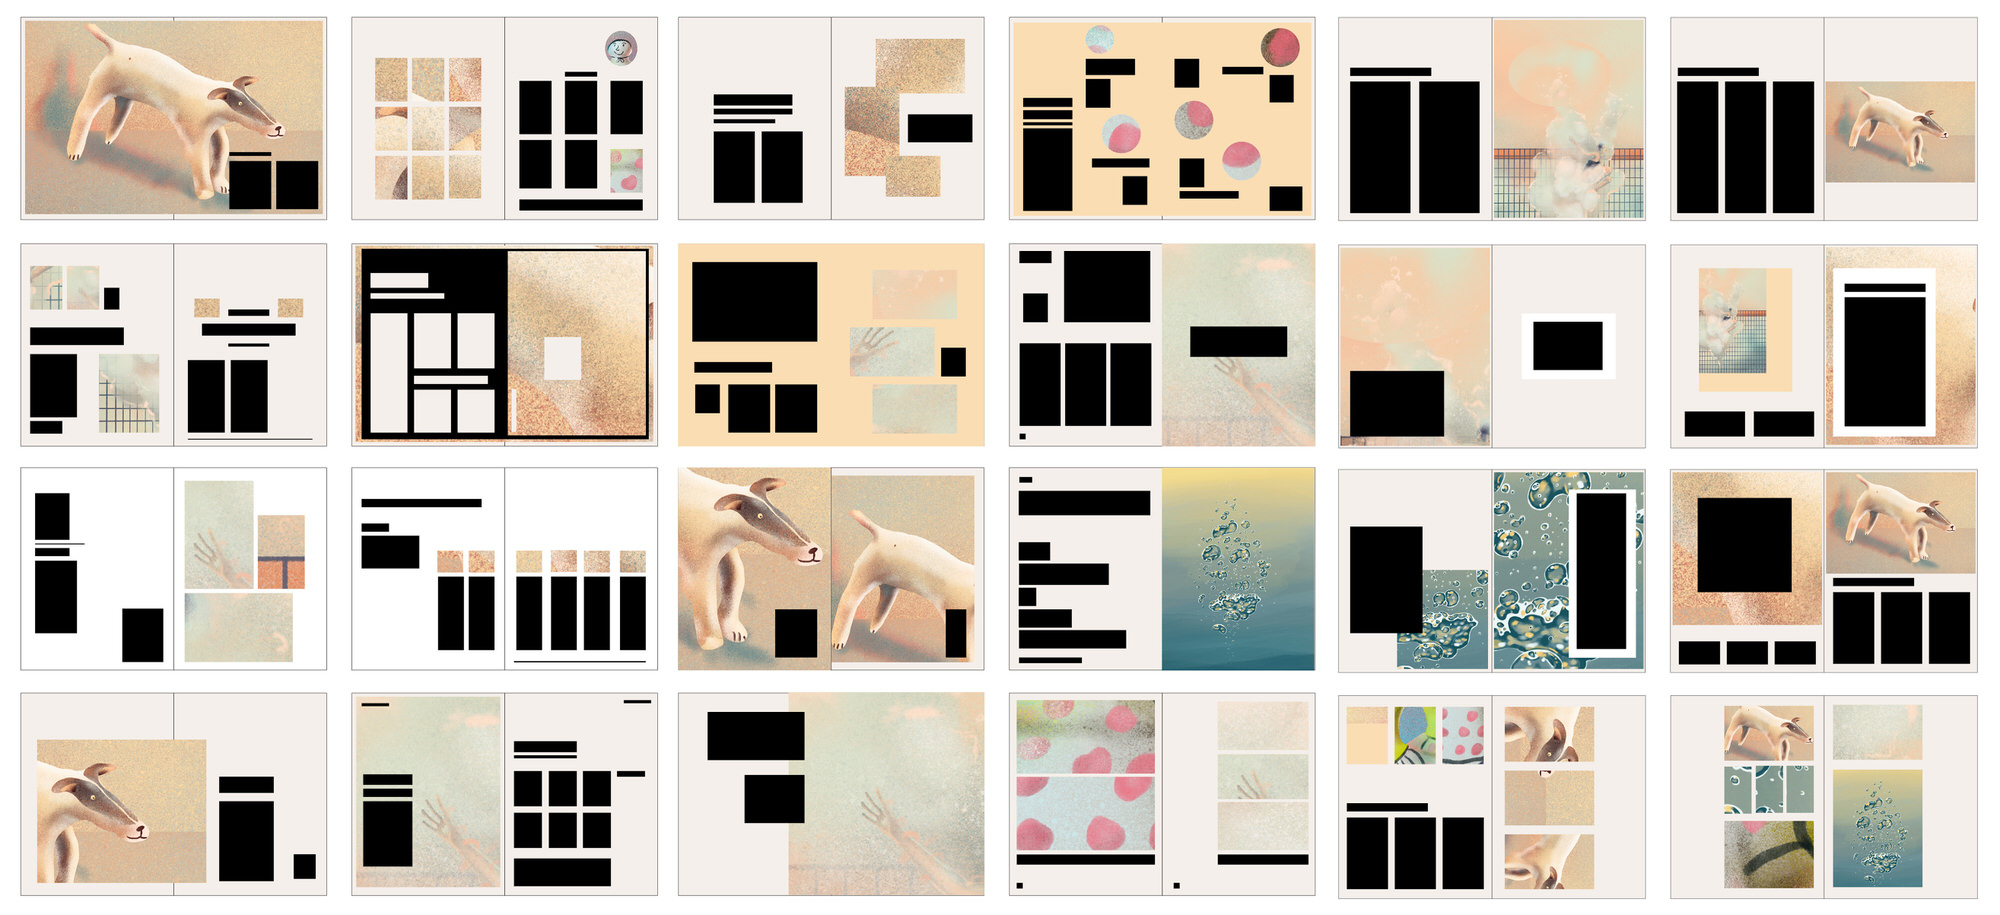 24 thumbnails showing different design layout experiments using Ida Henrich's own illustrations